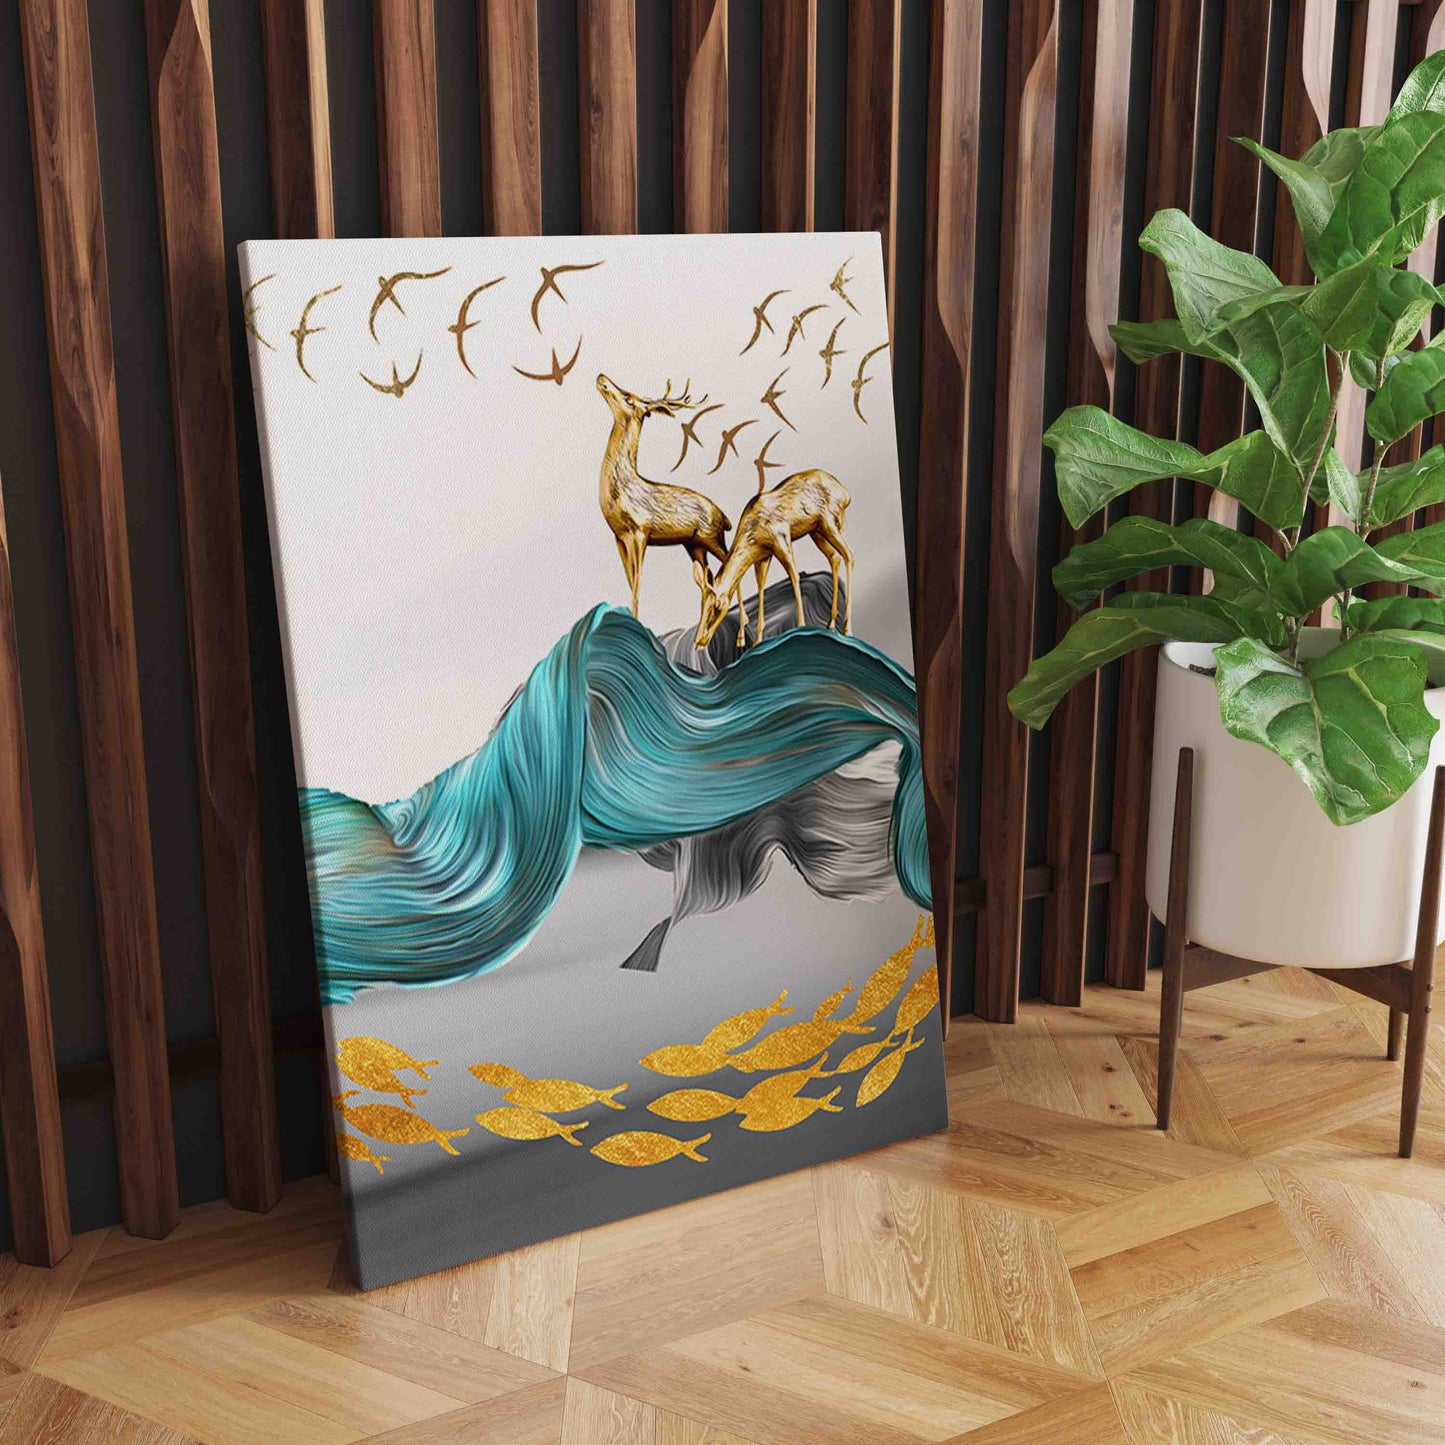 Golden Majesty: Nordic Abstract Golden Deer Painting Canvas Wall Art" - Gold Blue Wall Art Pictures For Living Room Modern Home Decoration S04E03